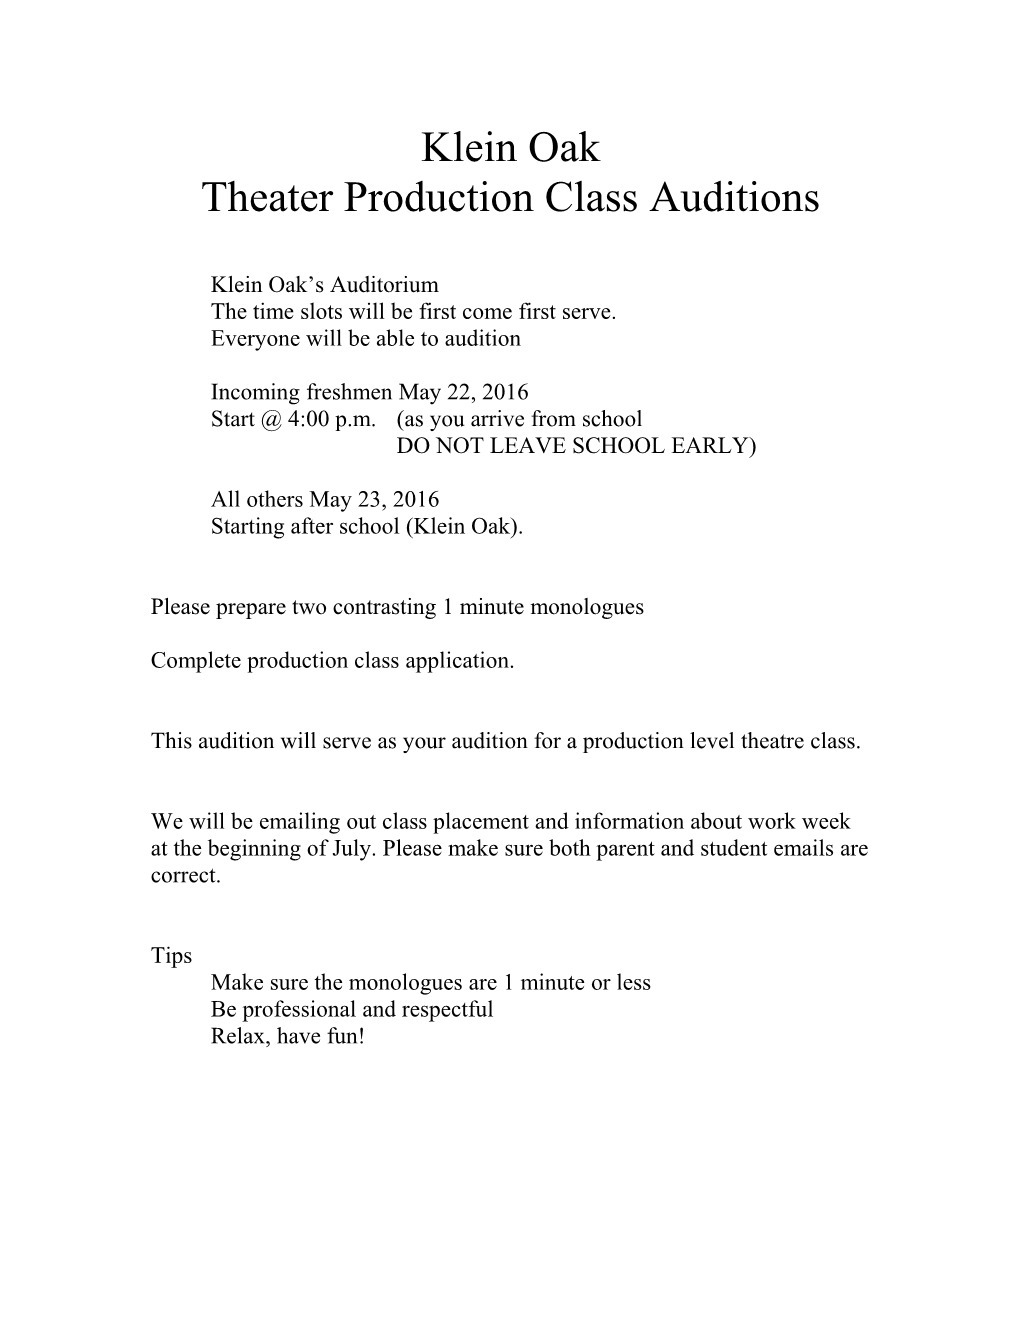 Theater Production Class Auditions